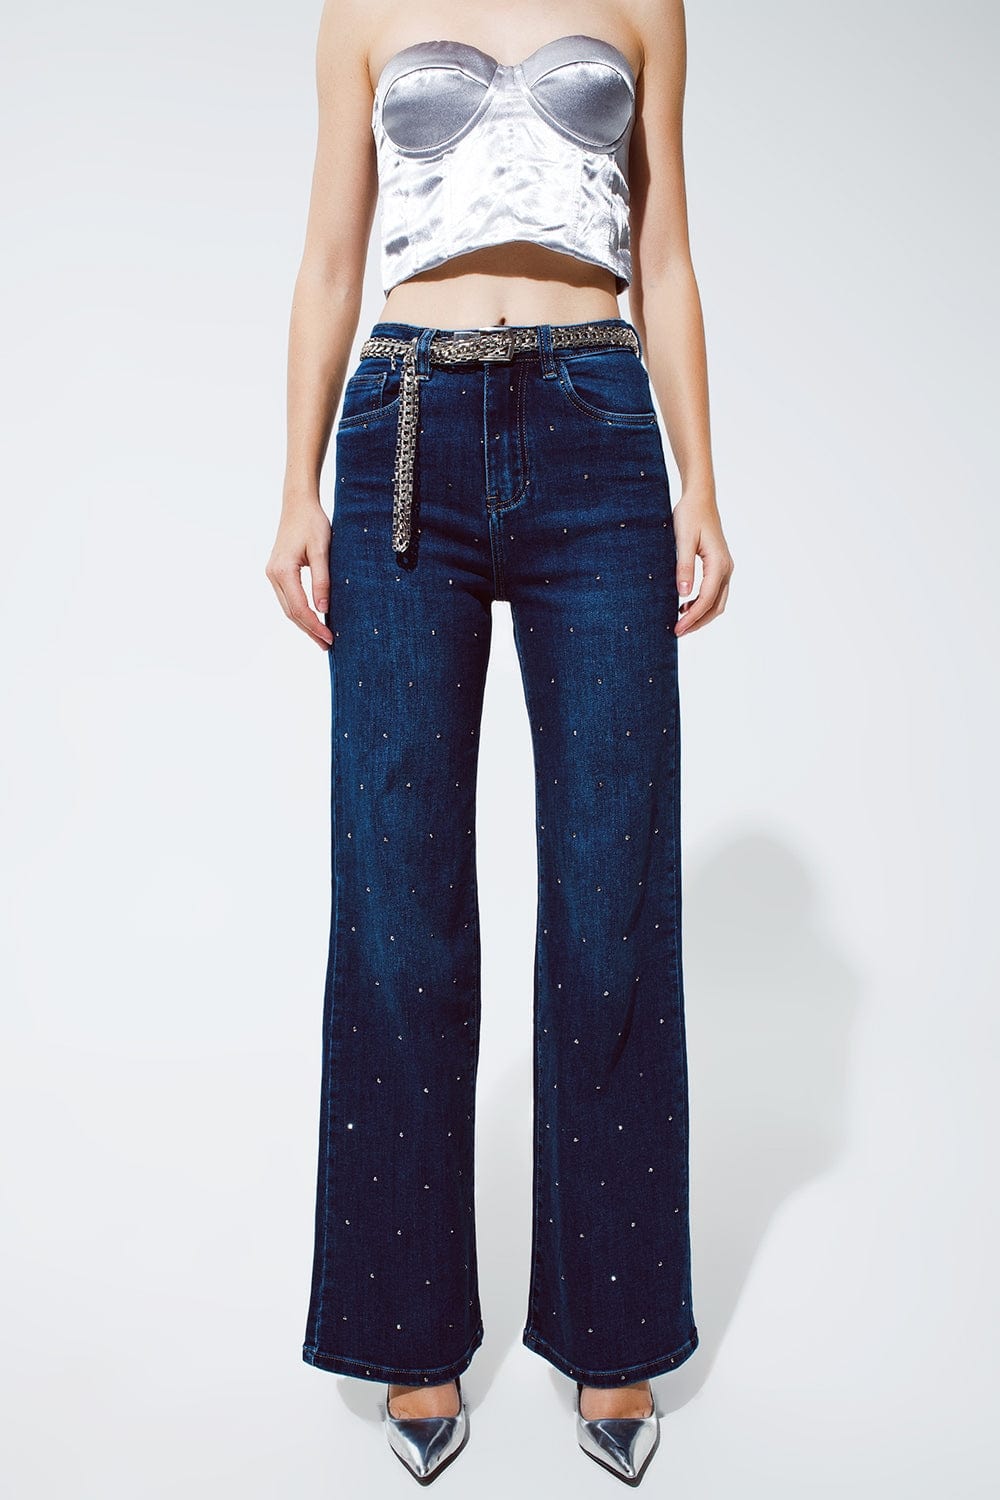 Q2 Women's Jean Straight Leg Jeans With Strass Detail In Blue